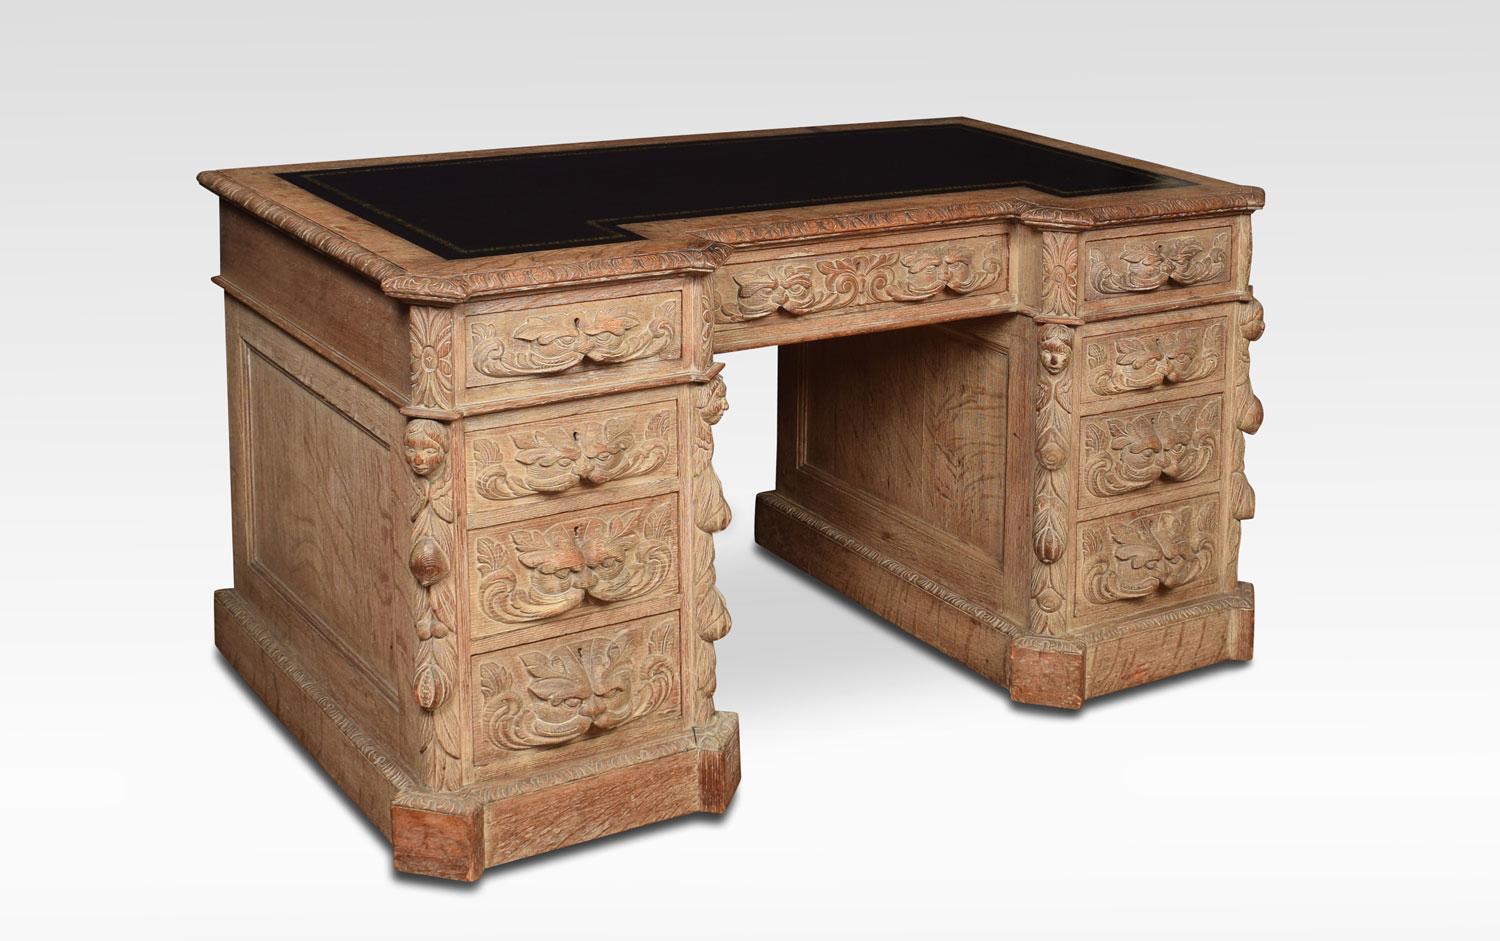 Limed Oak Carved Pedestal Desk In Good Condition For Sale In Cheshire, GB